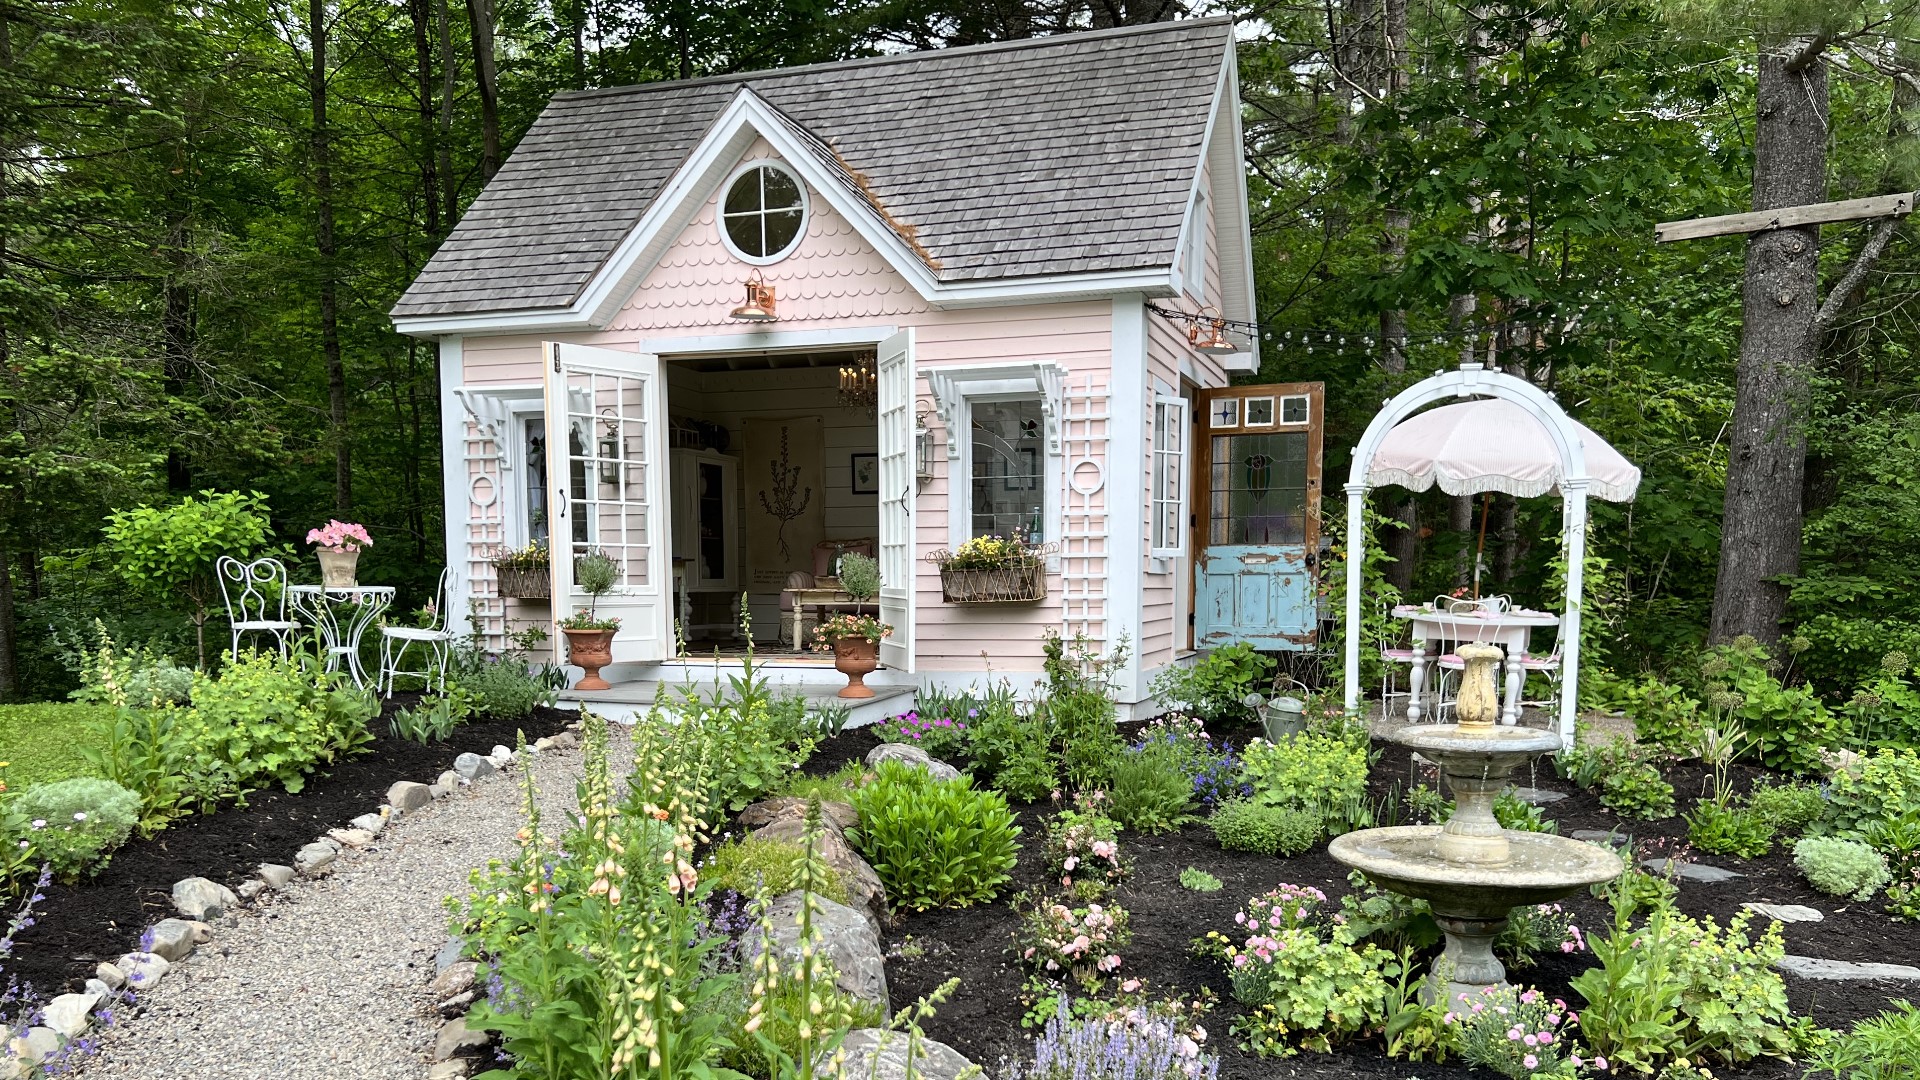 Erin Clark creates beautiful videos of her cottage garden and shares them with the world. Gardening with Gutner went for a tour and a social media lesson.